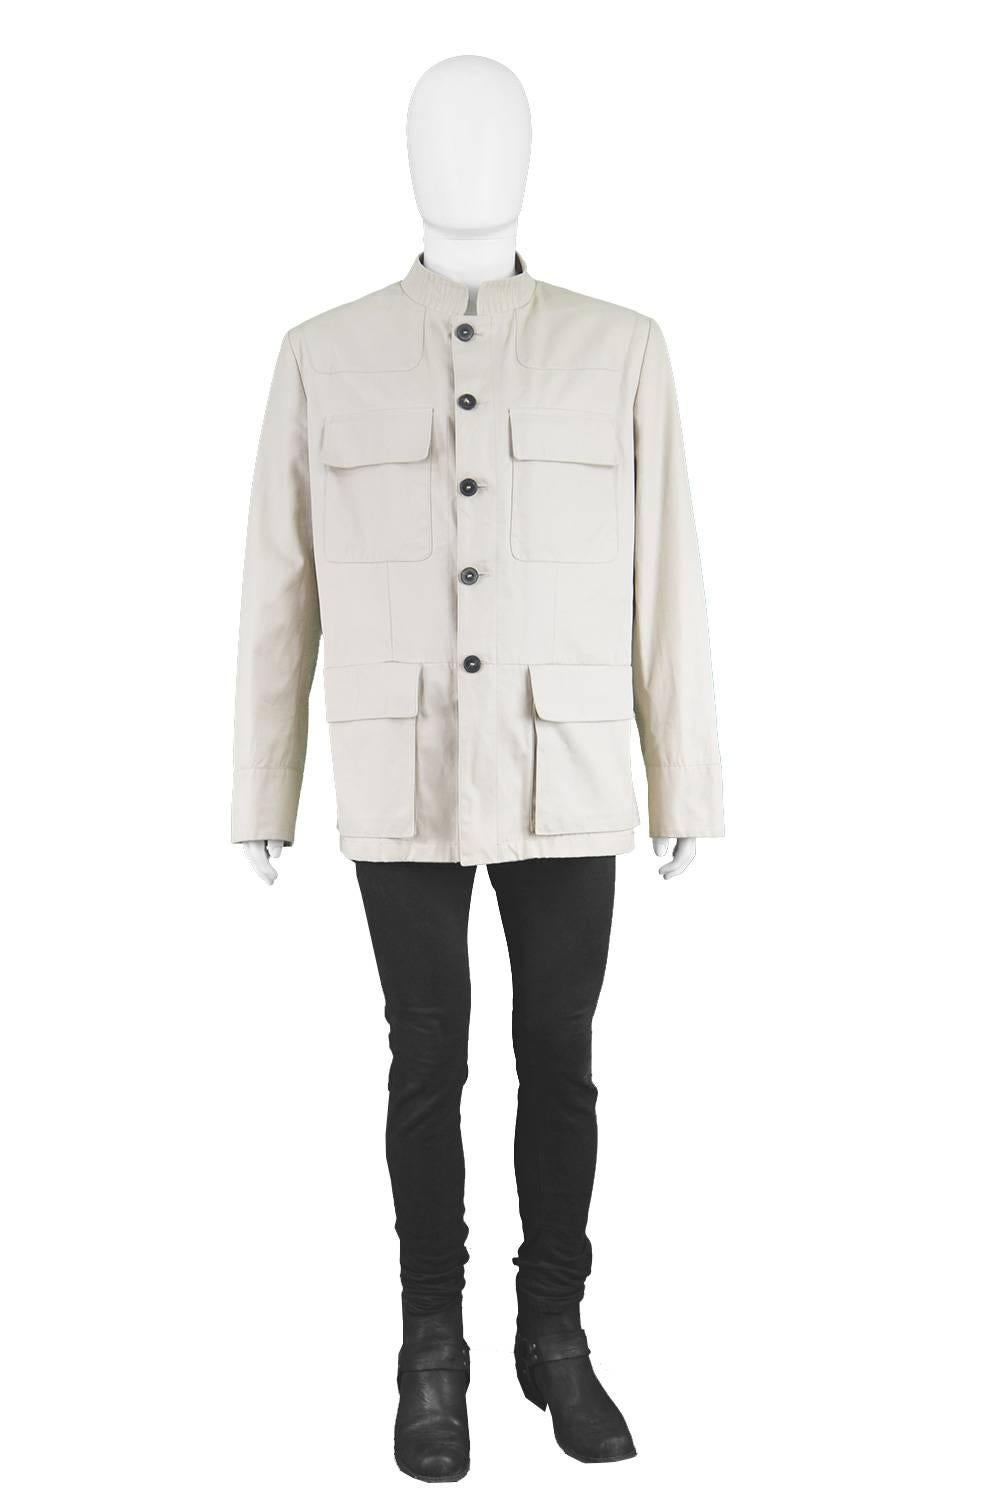 Yves Saint Laurent Men's Beige Cotton Single Breasted YSL Safari Jacket 

Size: Marked 54 which is roughly a men's Large to XL. Please check measurements.
Chest - 44” / 112cm
Waist - 42” / 106cm
Length (Shoulder to Hem) - 29” / 73cm
Shoulder to